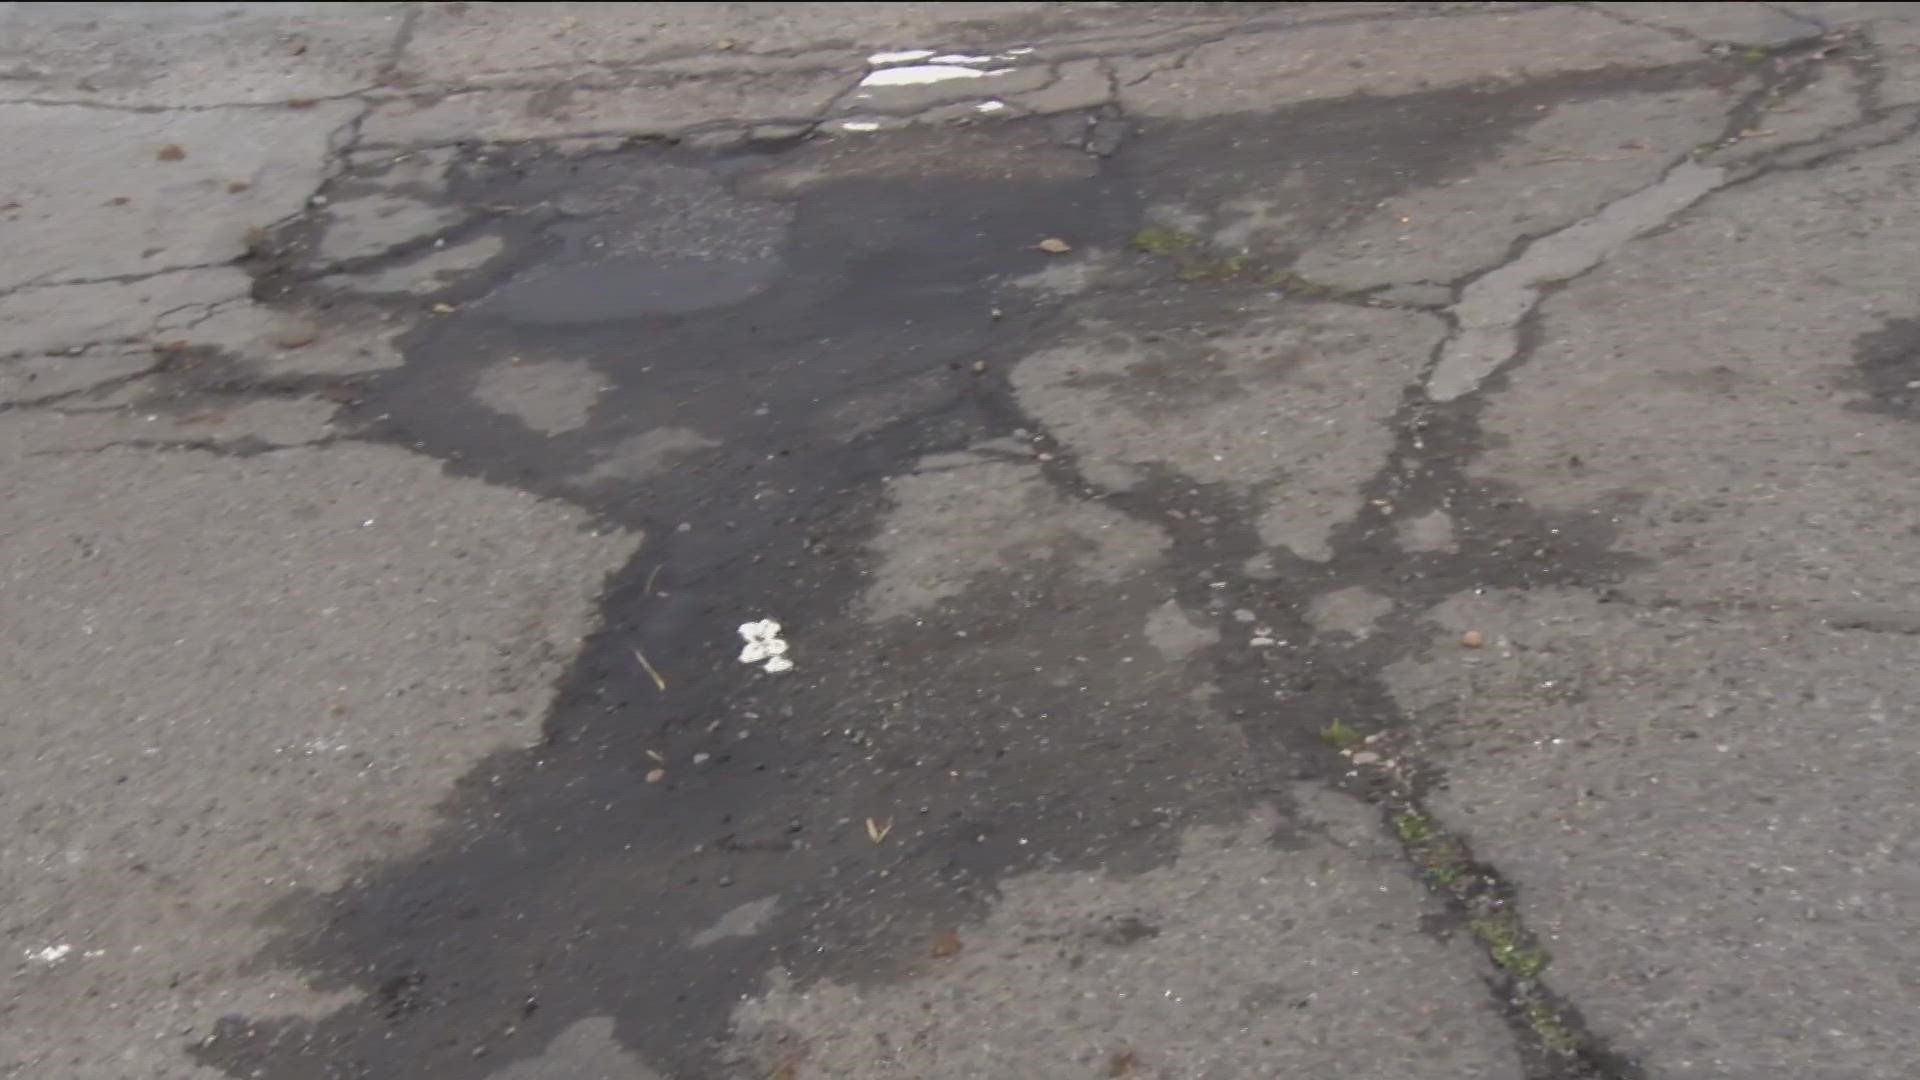 From uneven pavement, potholes to cracks in the street, residents said the neglected streets are unacceptable.